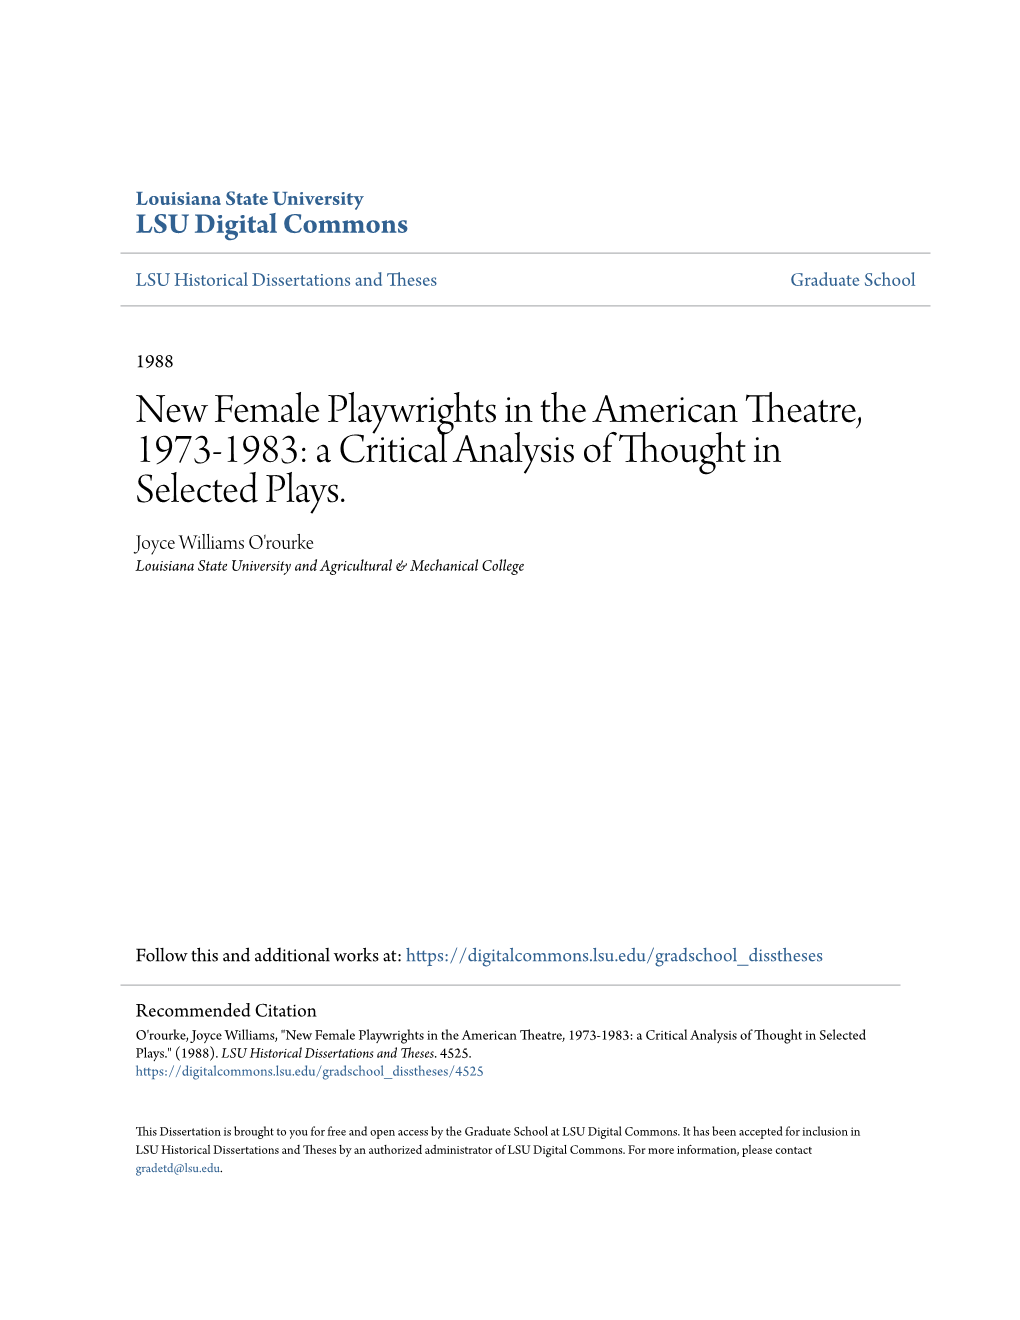 New Female Playwrights in the American Theatre, 1973-1983: a Critical Analysis of Thought in Selected Plays